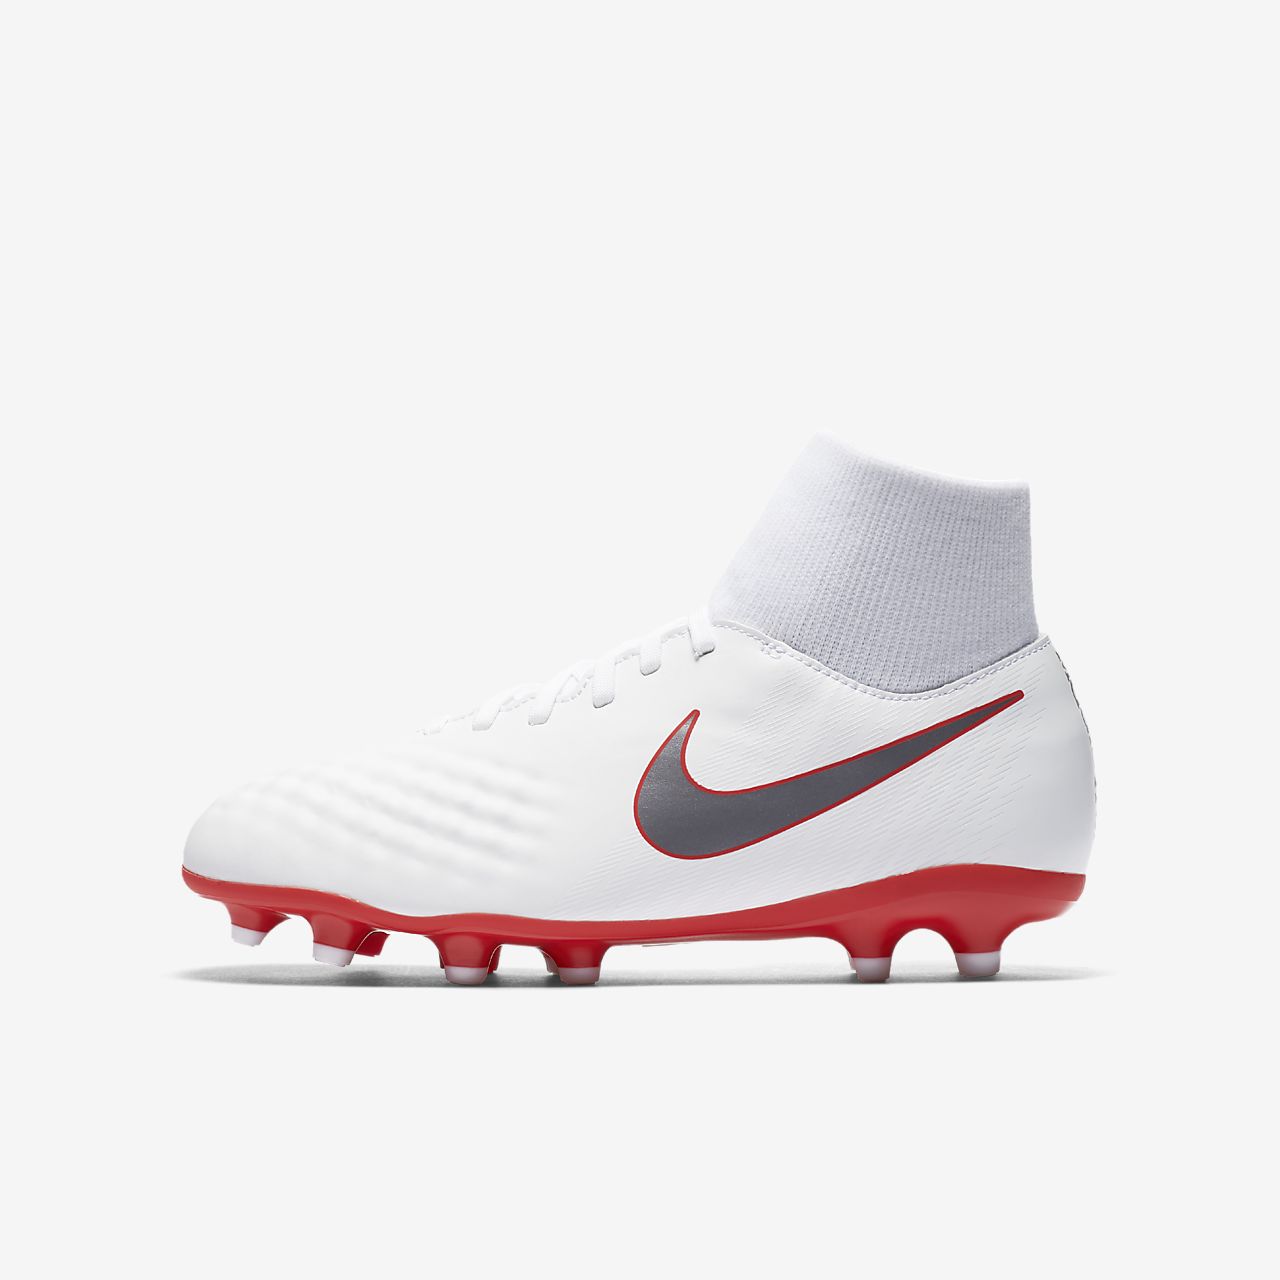 Nike Jr. Magista Obra II Academy Dynamic Fit Just Do It FG Younger/Older  Kids' Firm-Ground Football Boot. Nike BE